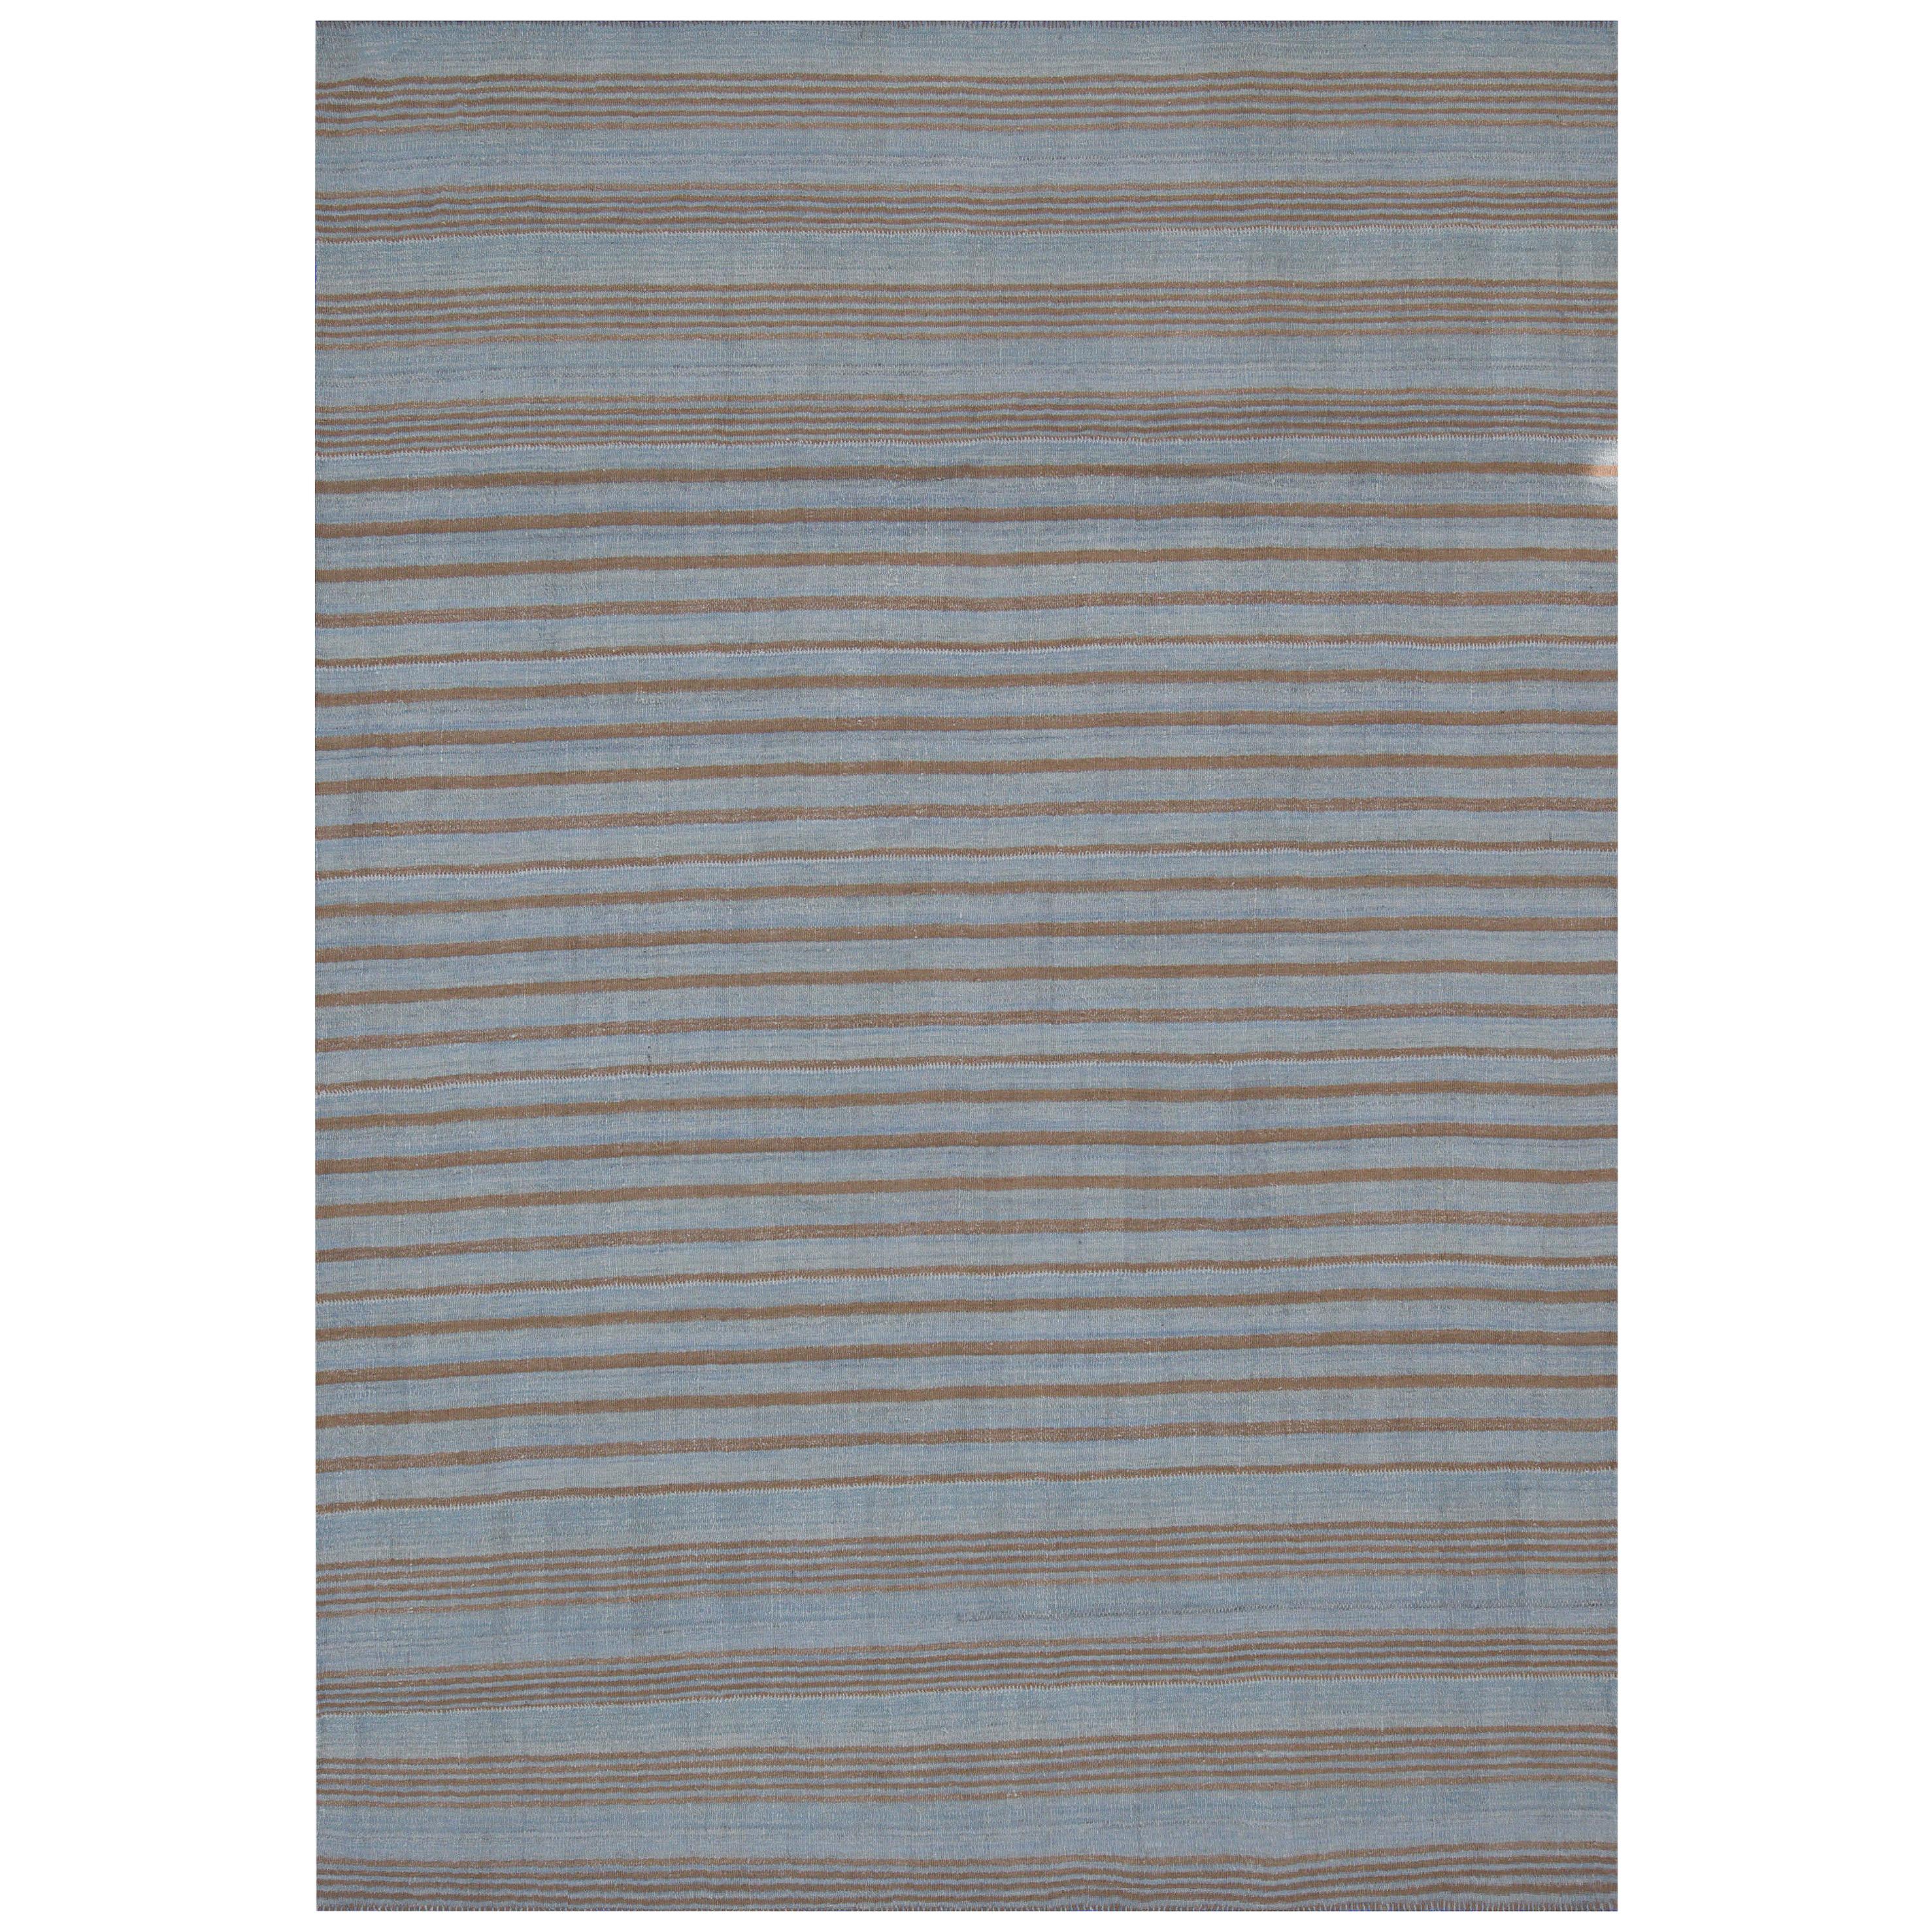 Contemporary Kilim Turkish Rug with Blue Field and Brown Stripes